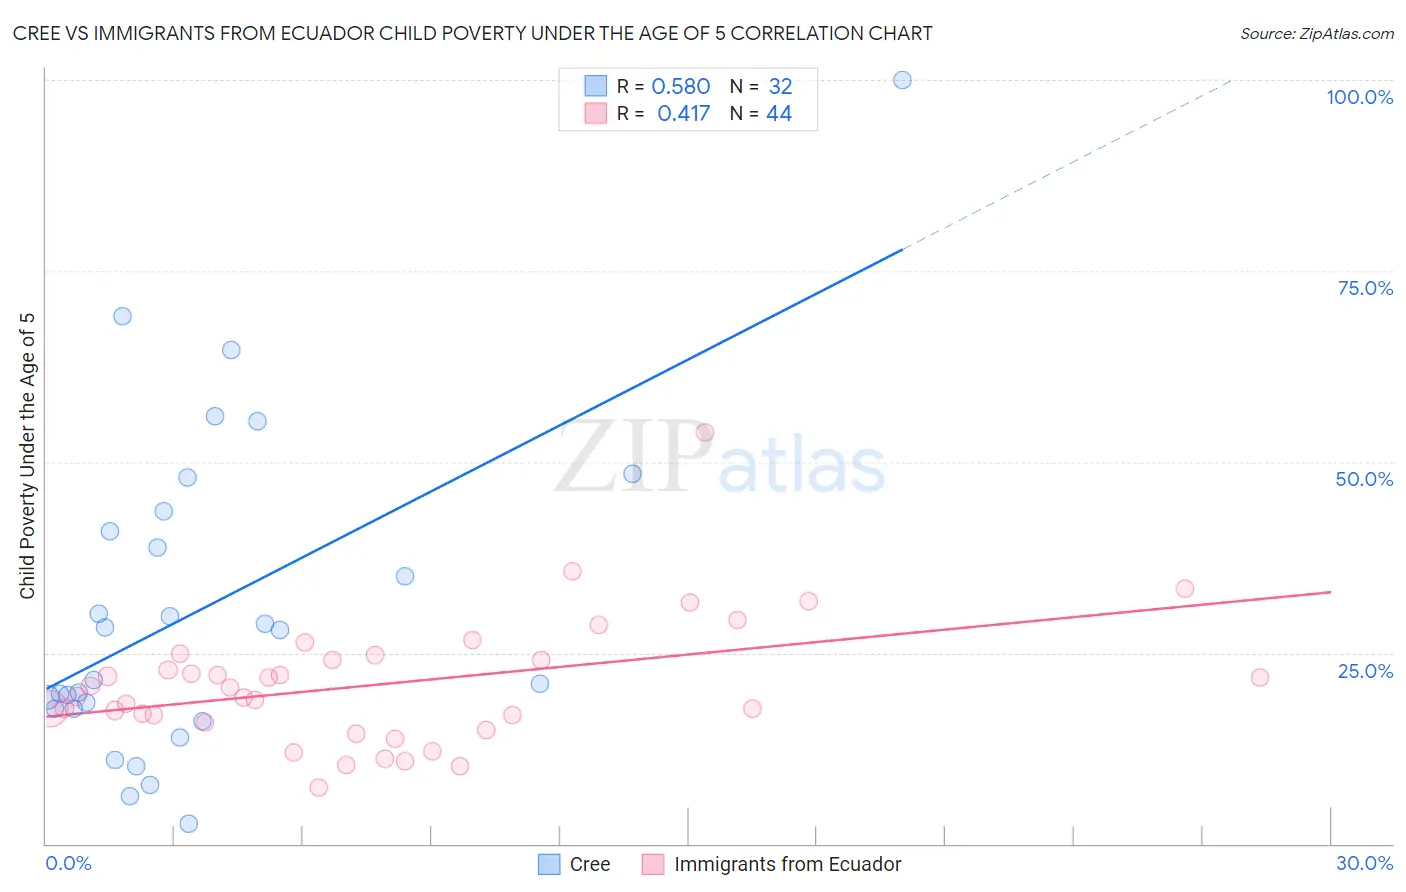 Cree vs Immigrants from Ecuador Child Poverty Under the Age of 5